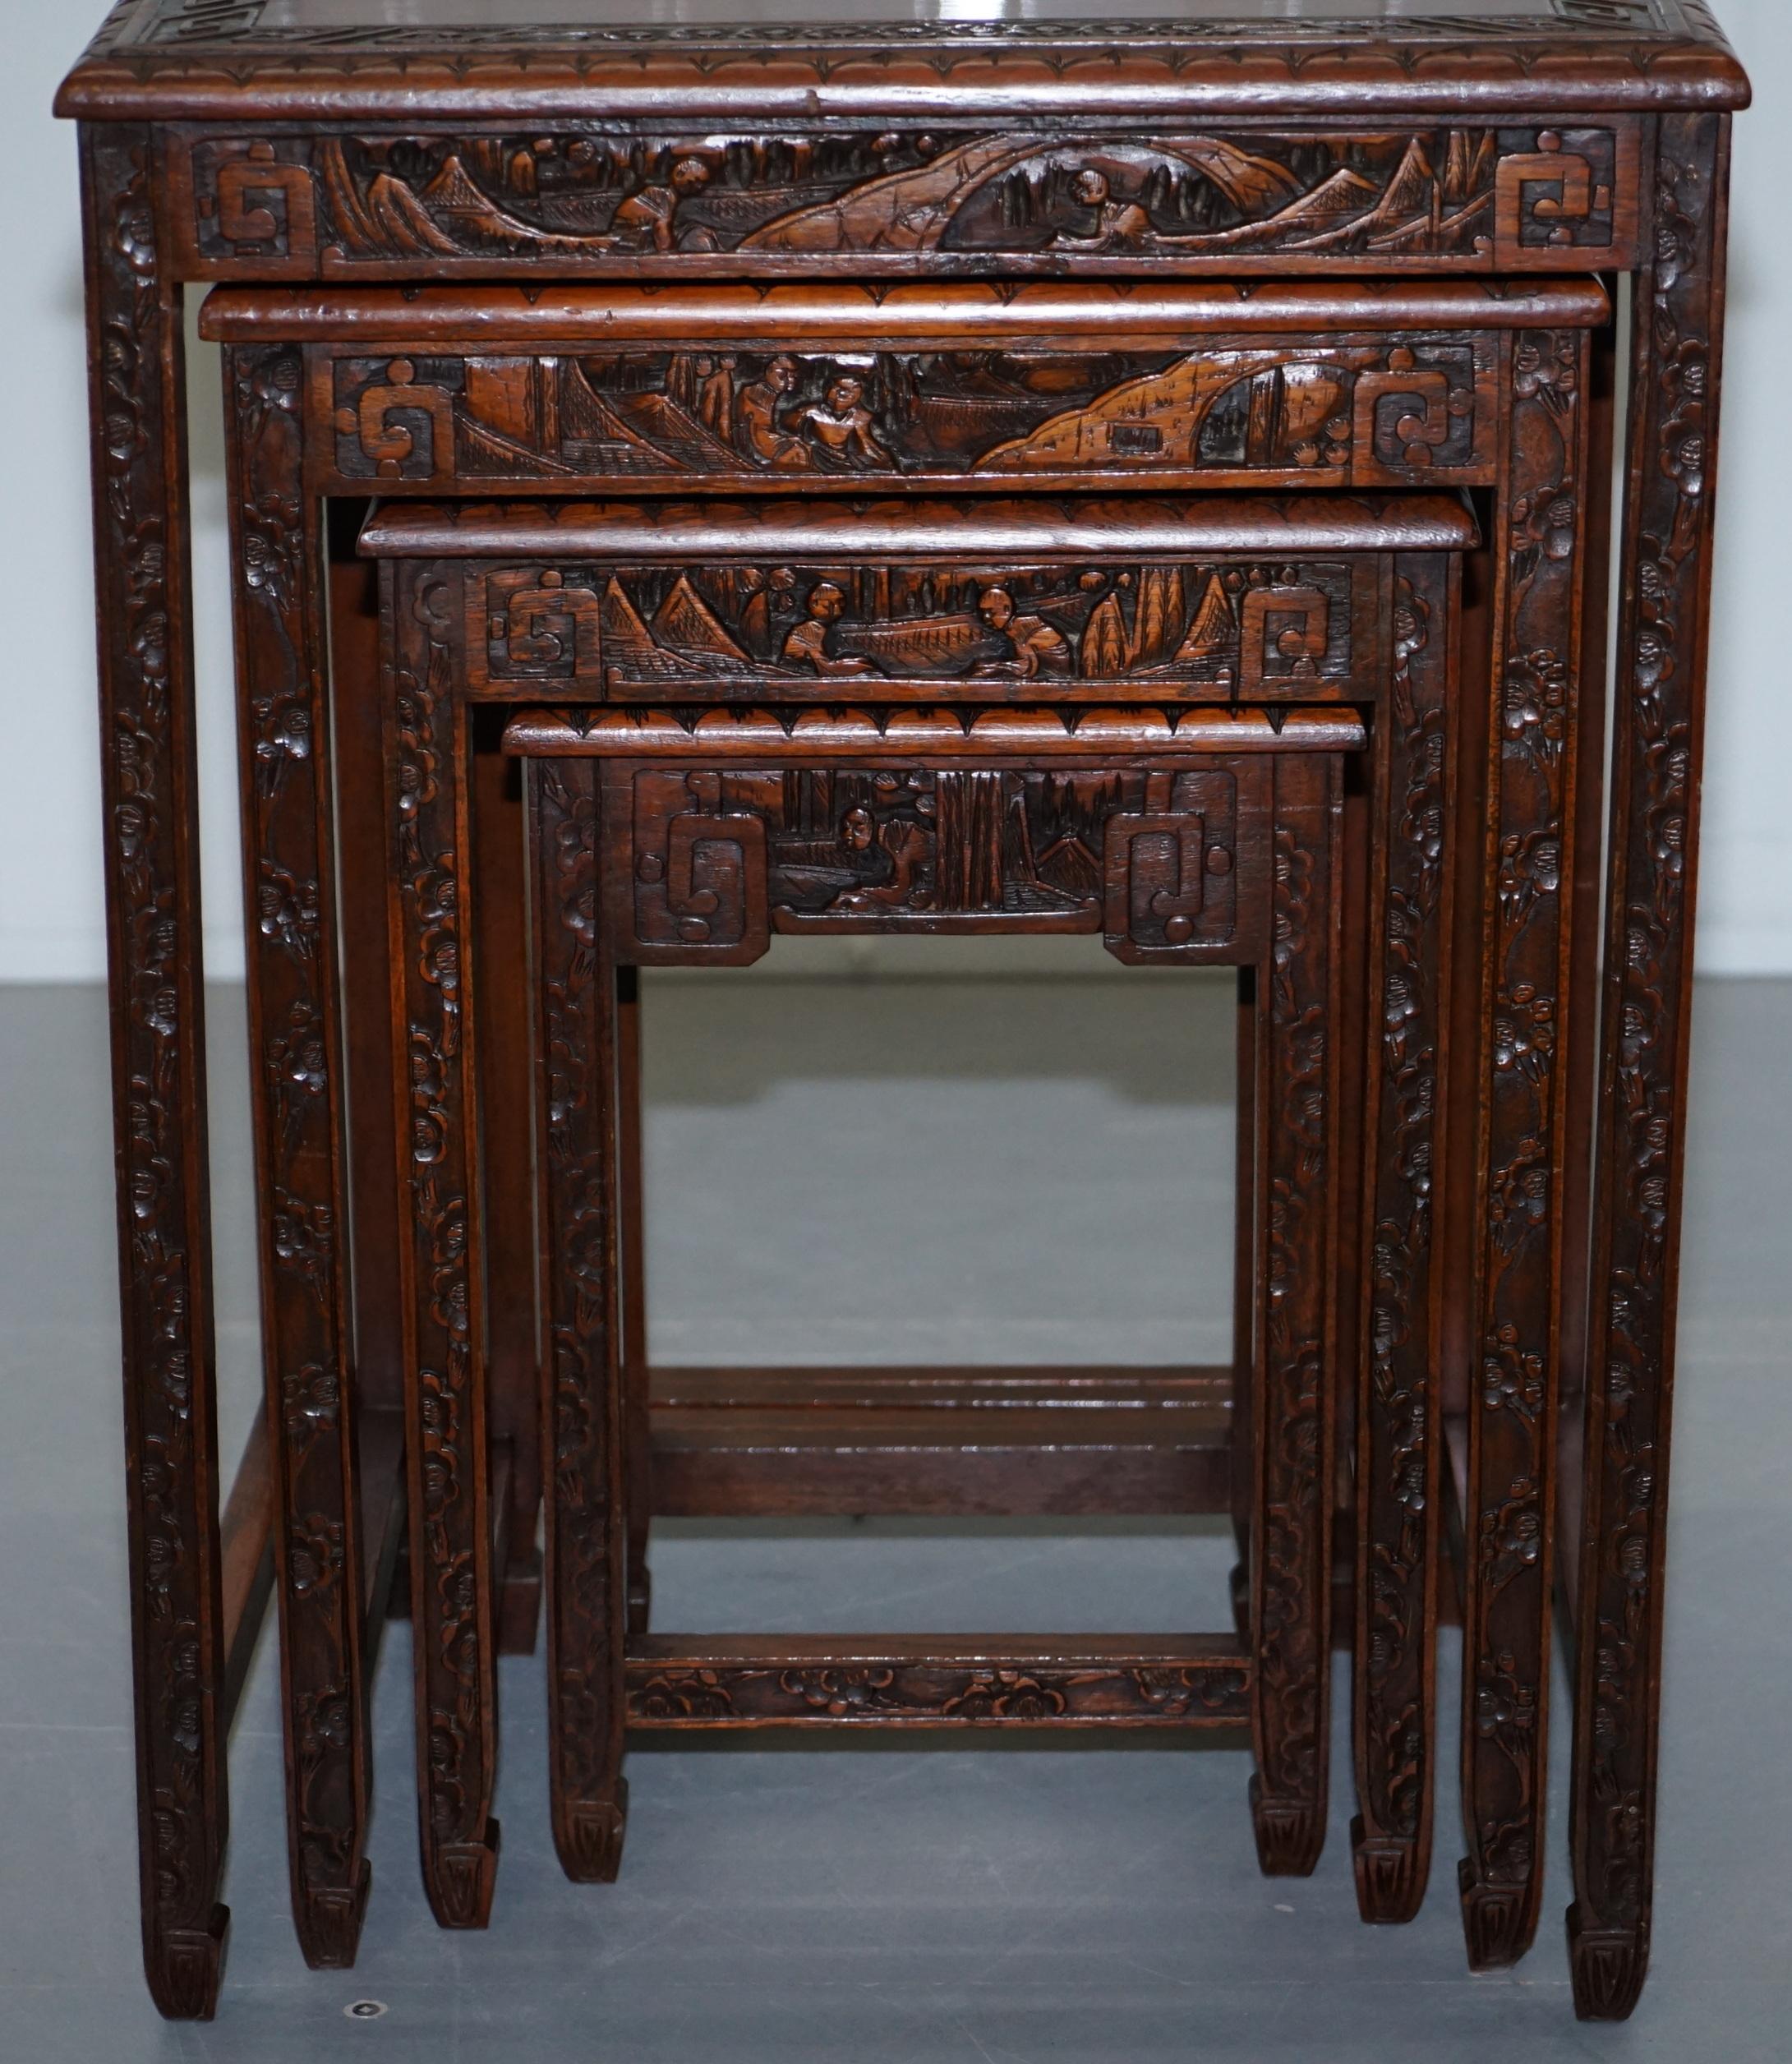 Mid-20th Century Chinese Export circa 1930s Nest of Four Tables Heavily Carved All over in Teak